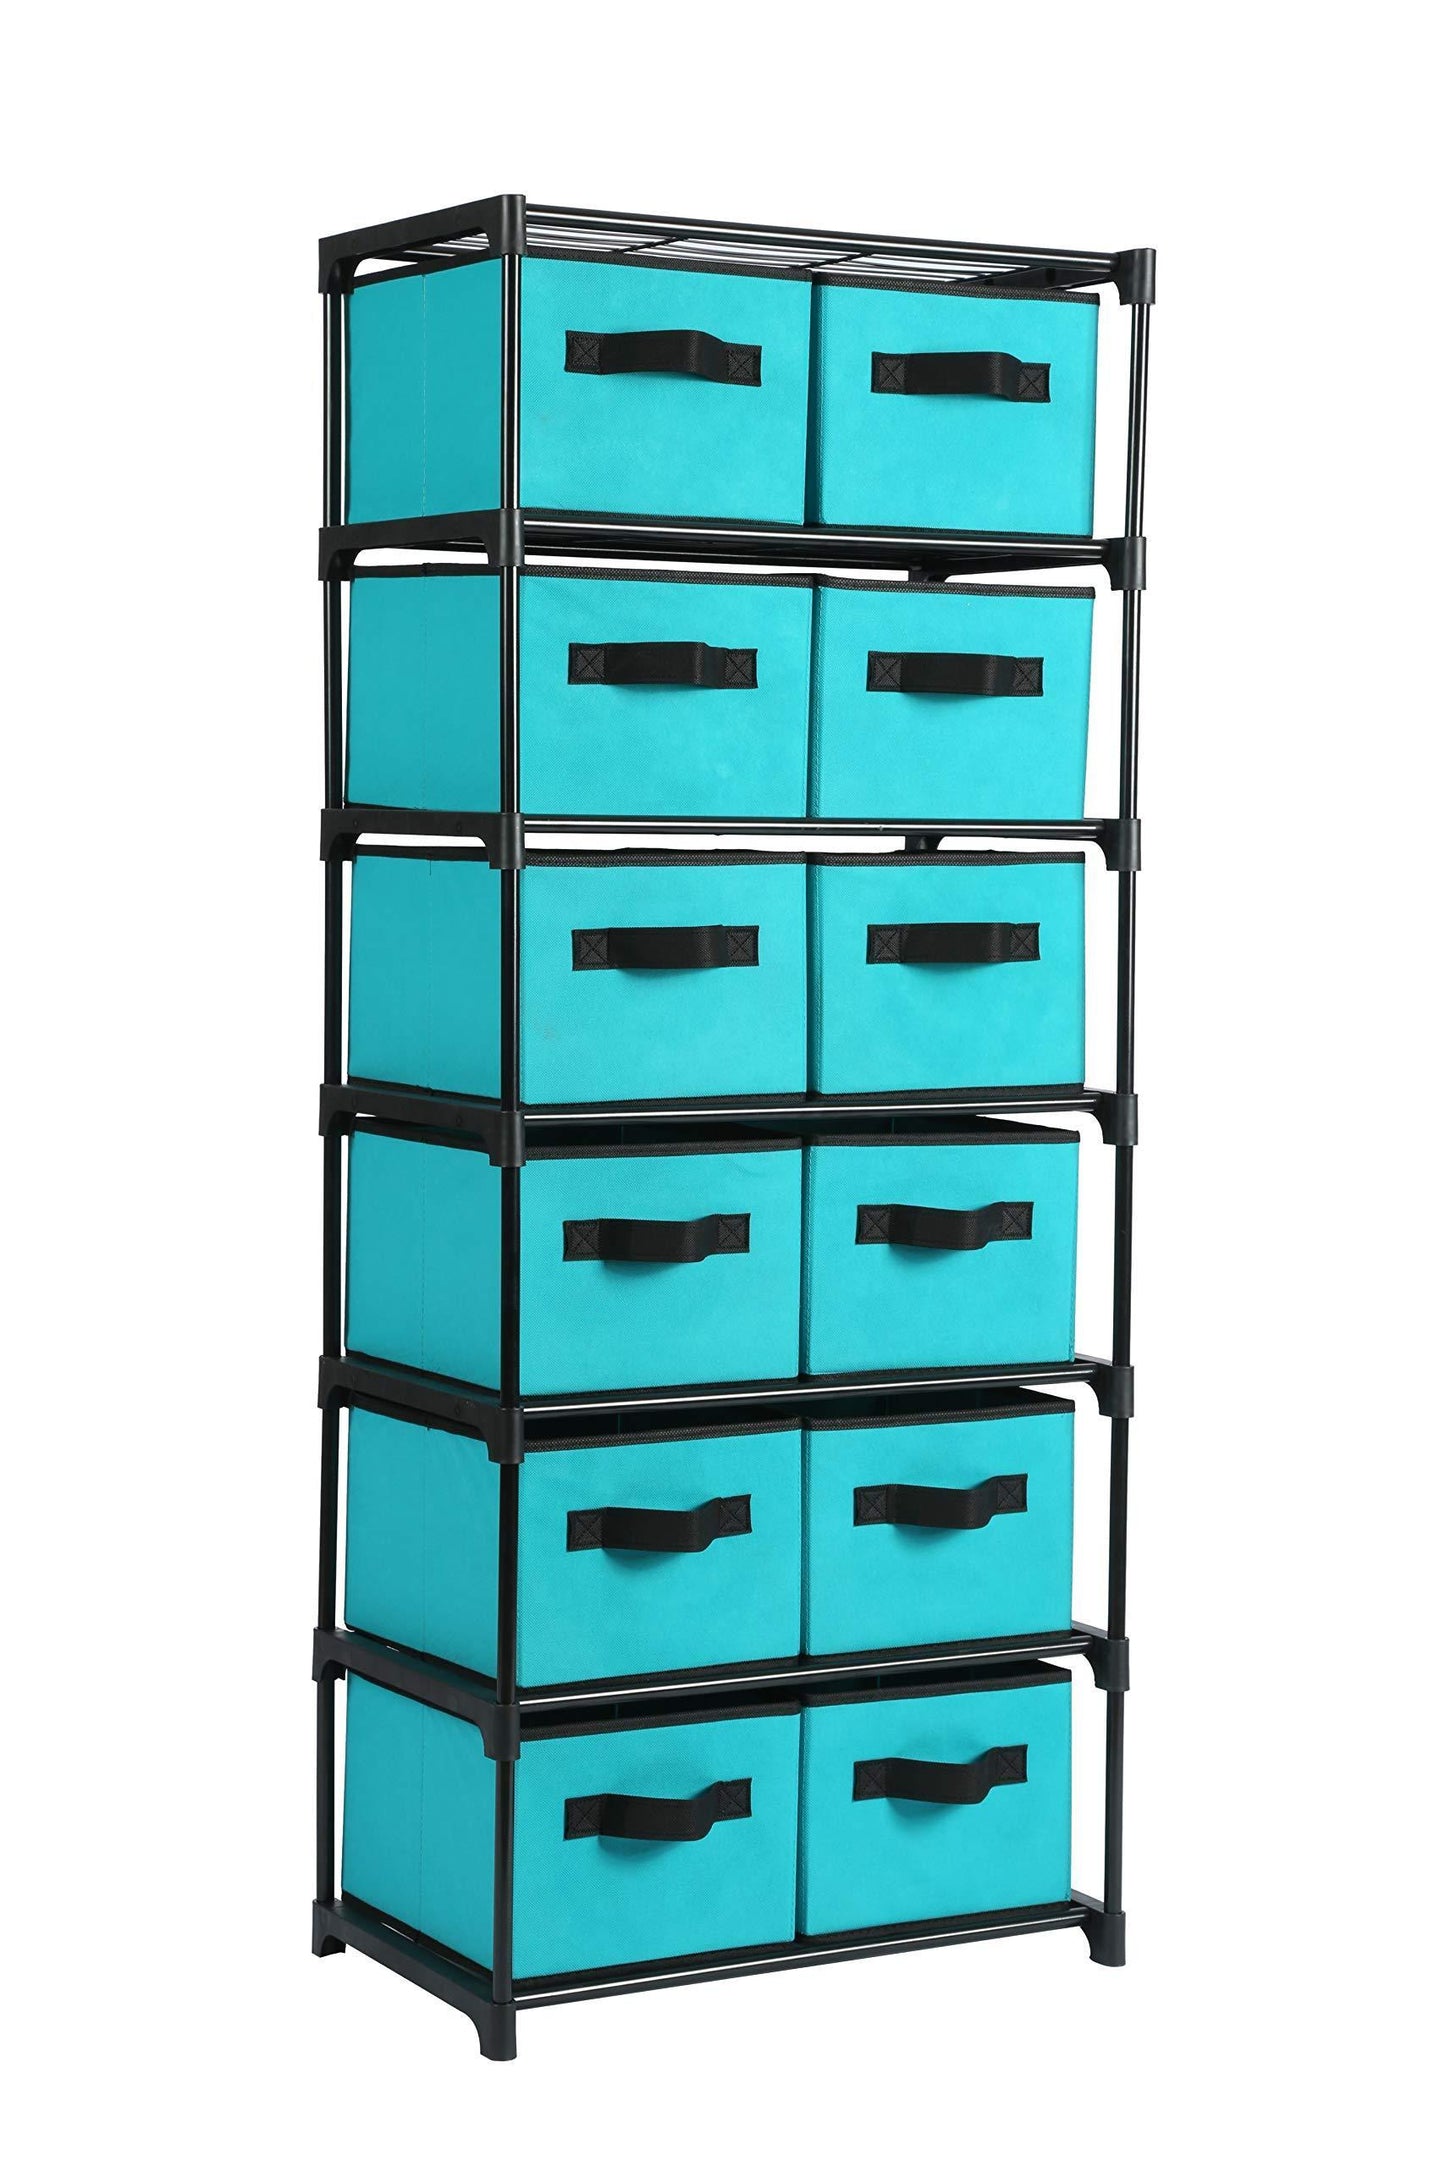 Online shopping homebi storage chest shelf unit 12 drawer storage cabinet with 6 tier metal wire shelf and 12 removable non woven fabric bins in turquoise 20 67w x 12d x49 21h